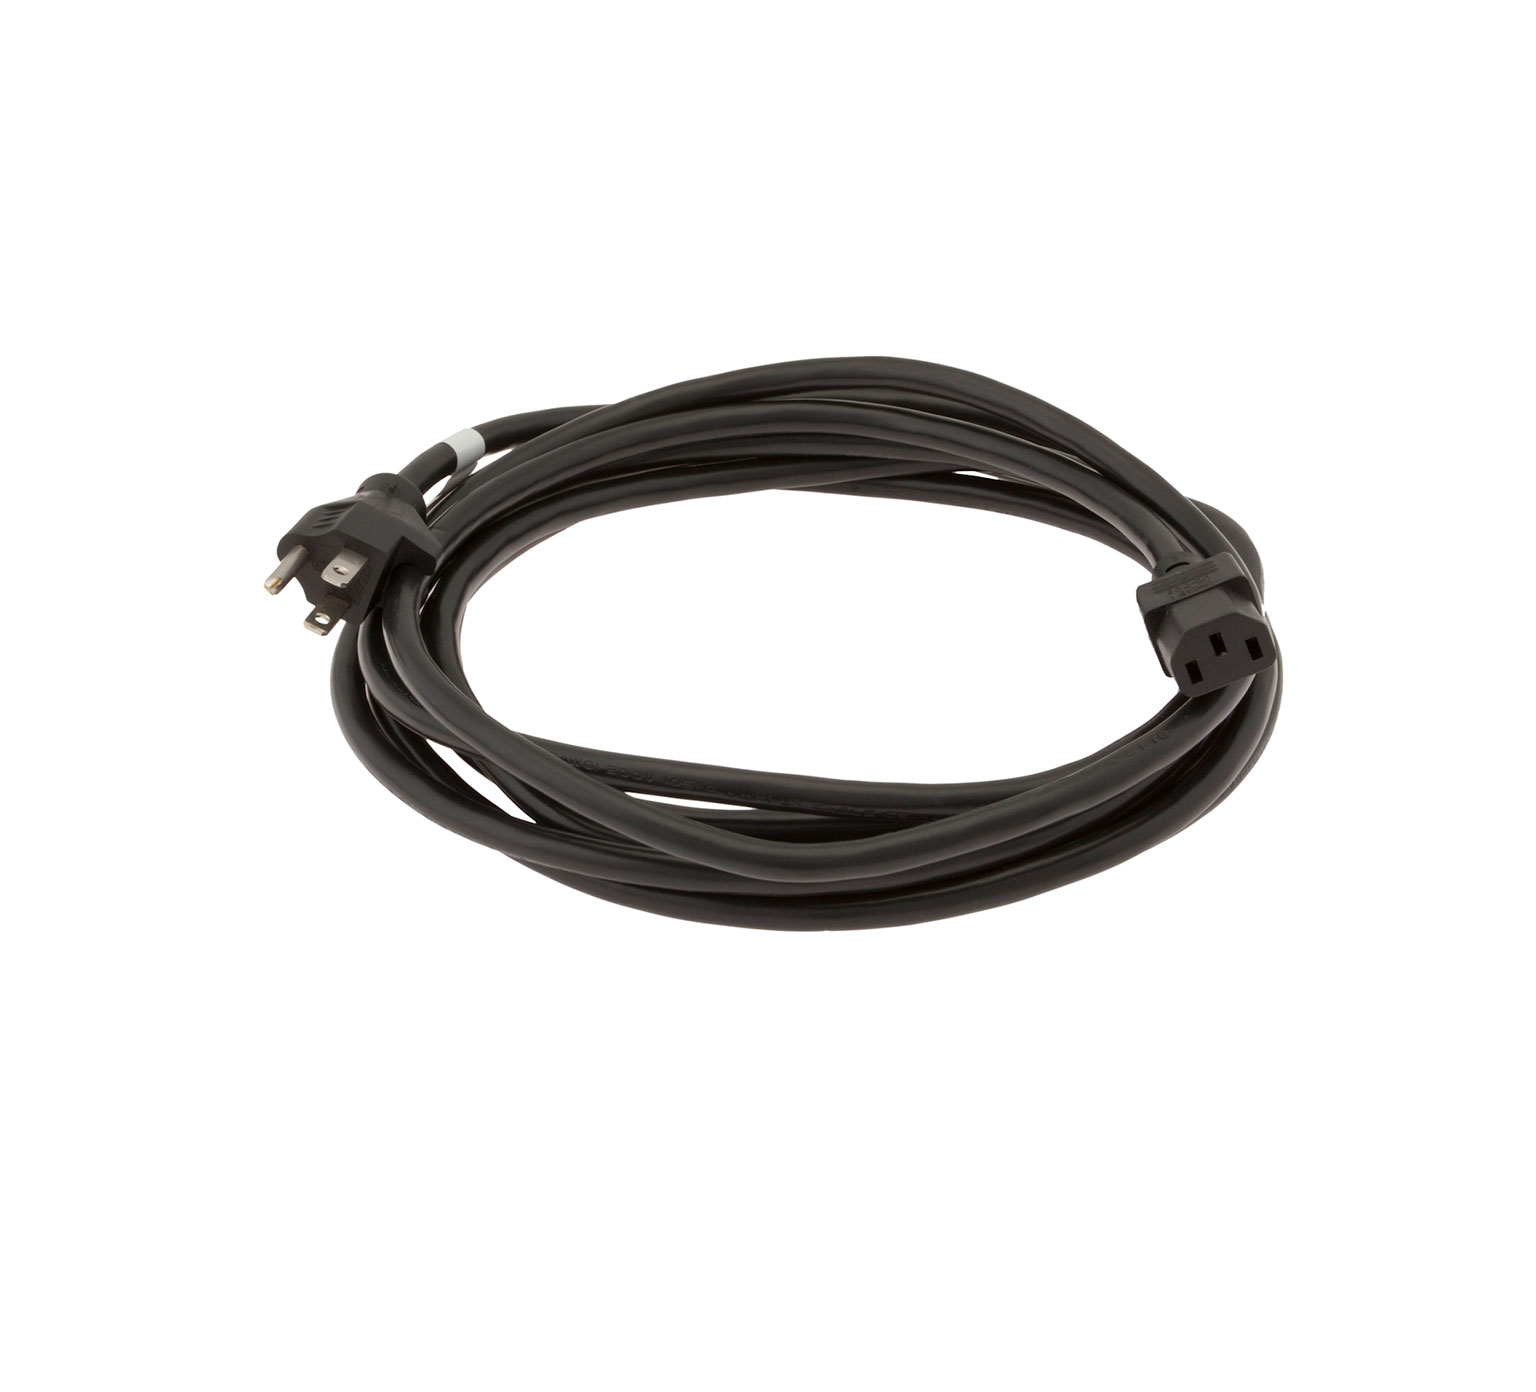 Tennant 1025642 OEM Power Cord-16/3 15 FT BLK for sale online 